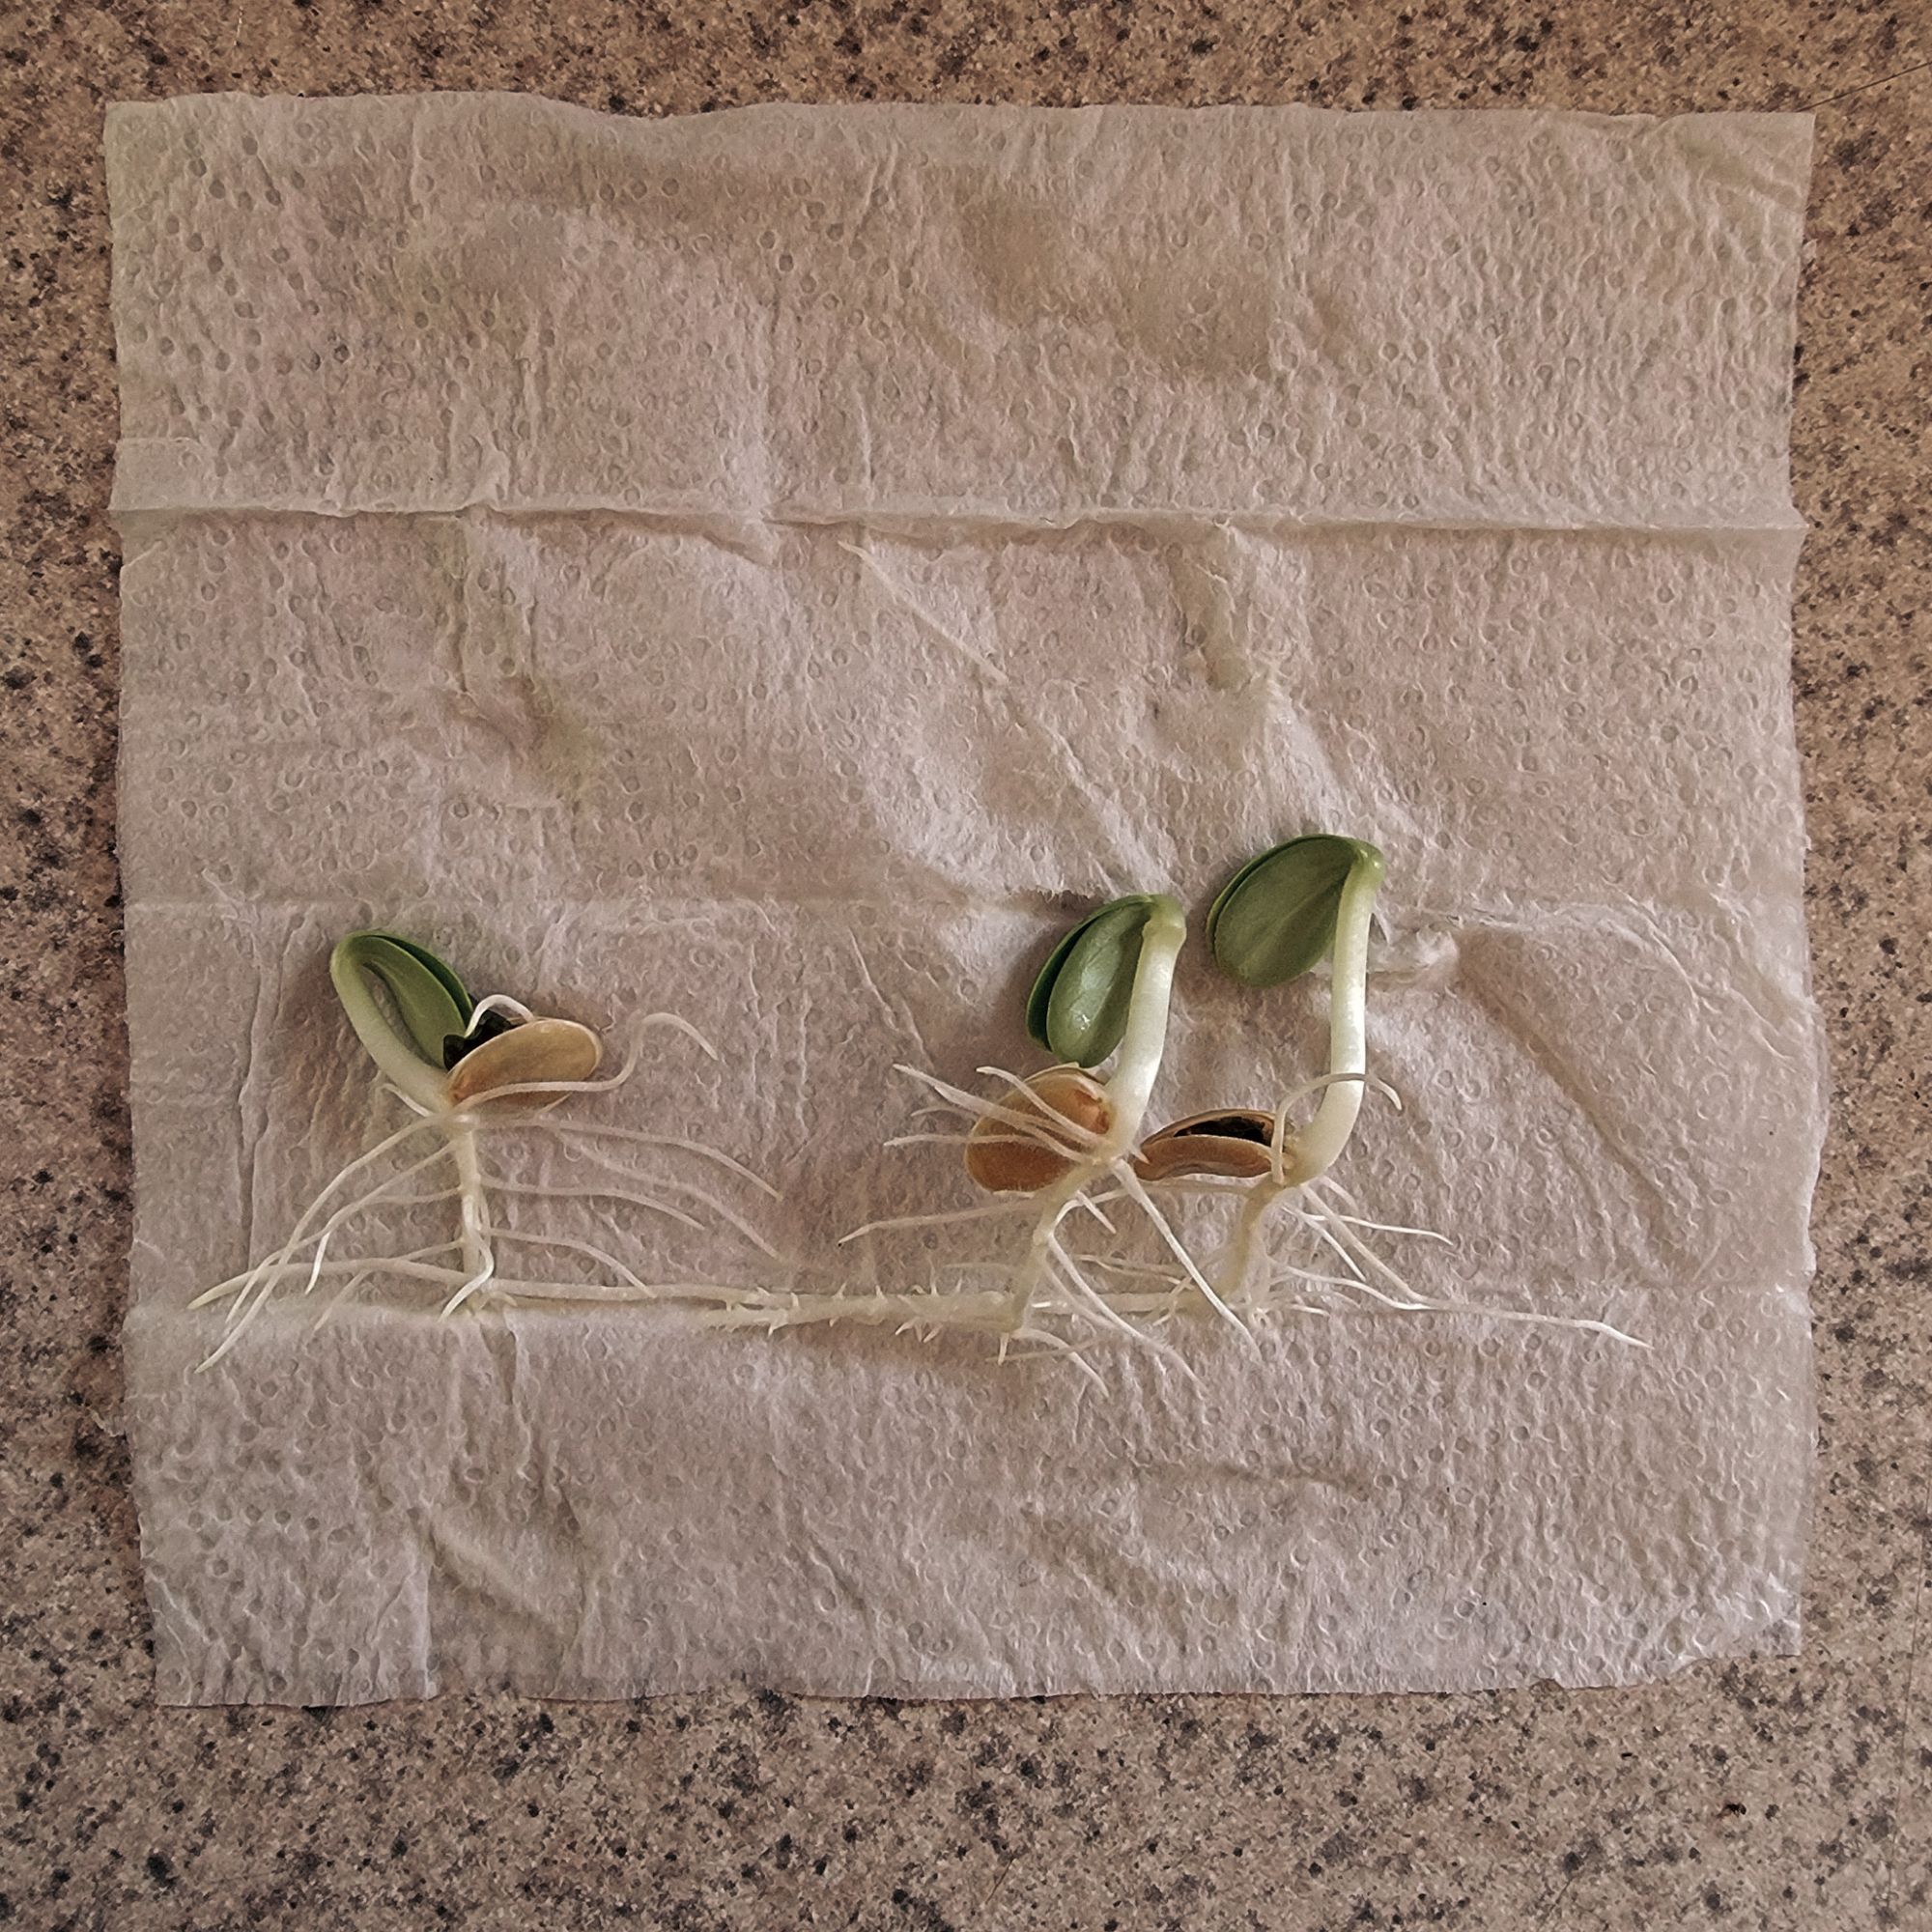 Luffa seeds germinated in paper towel